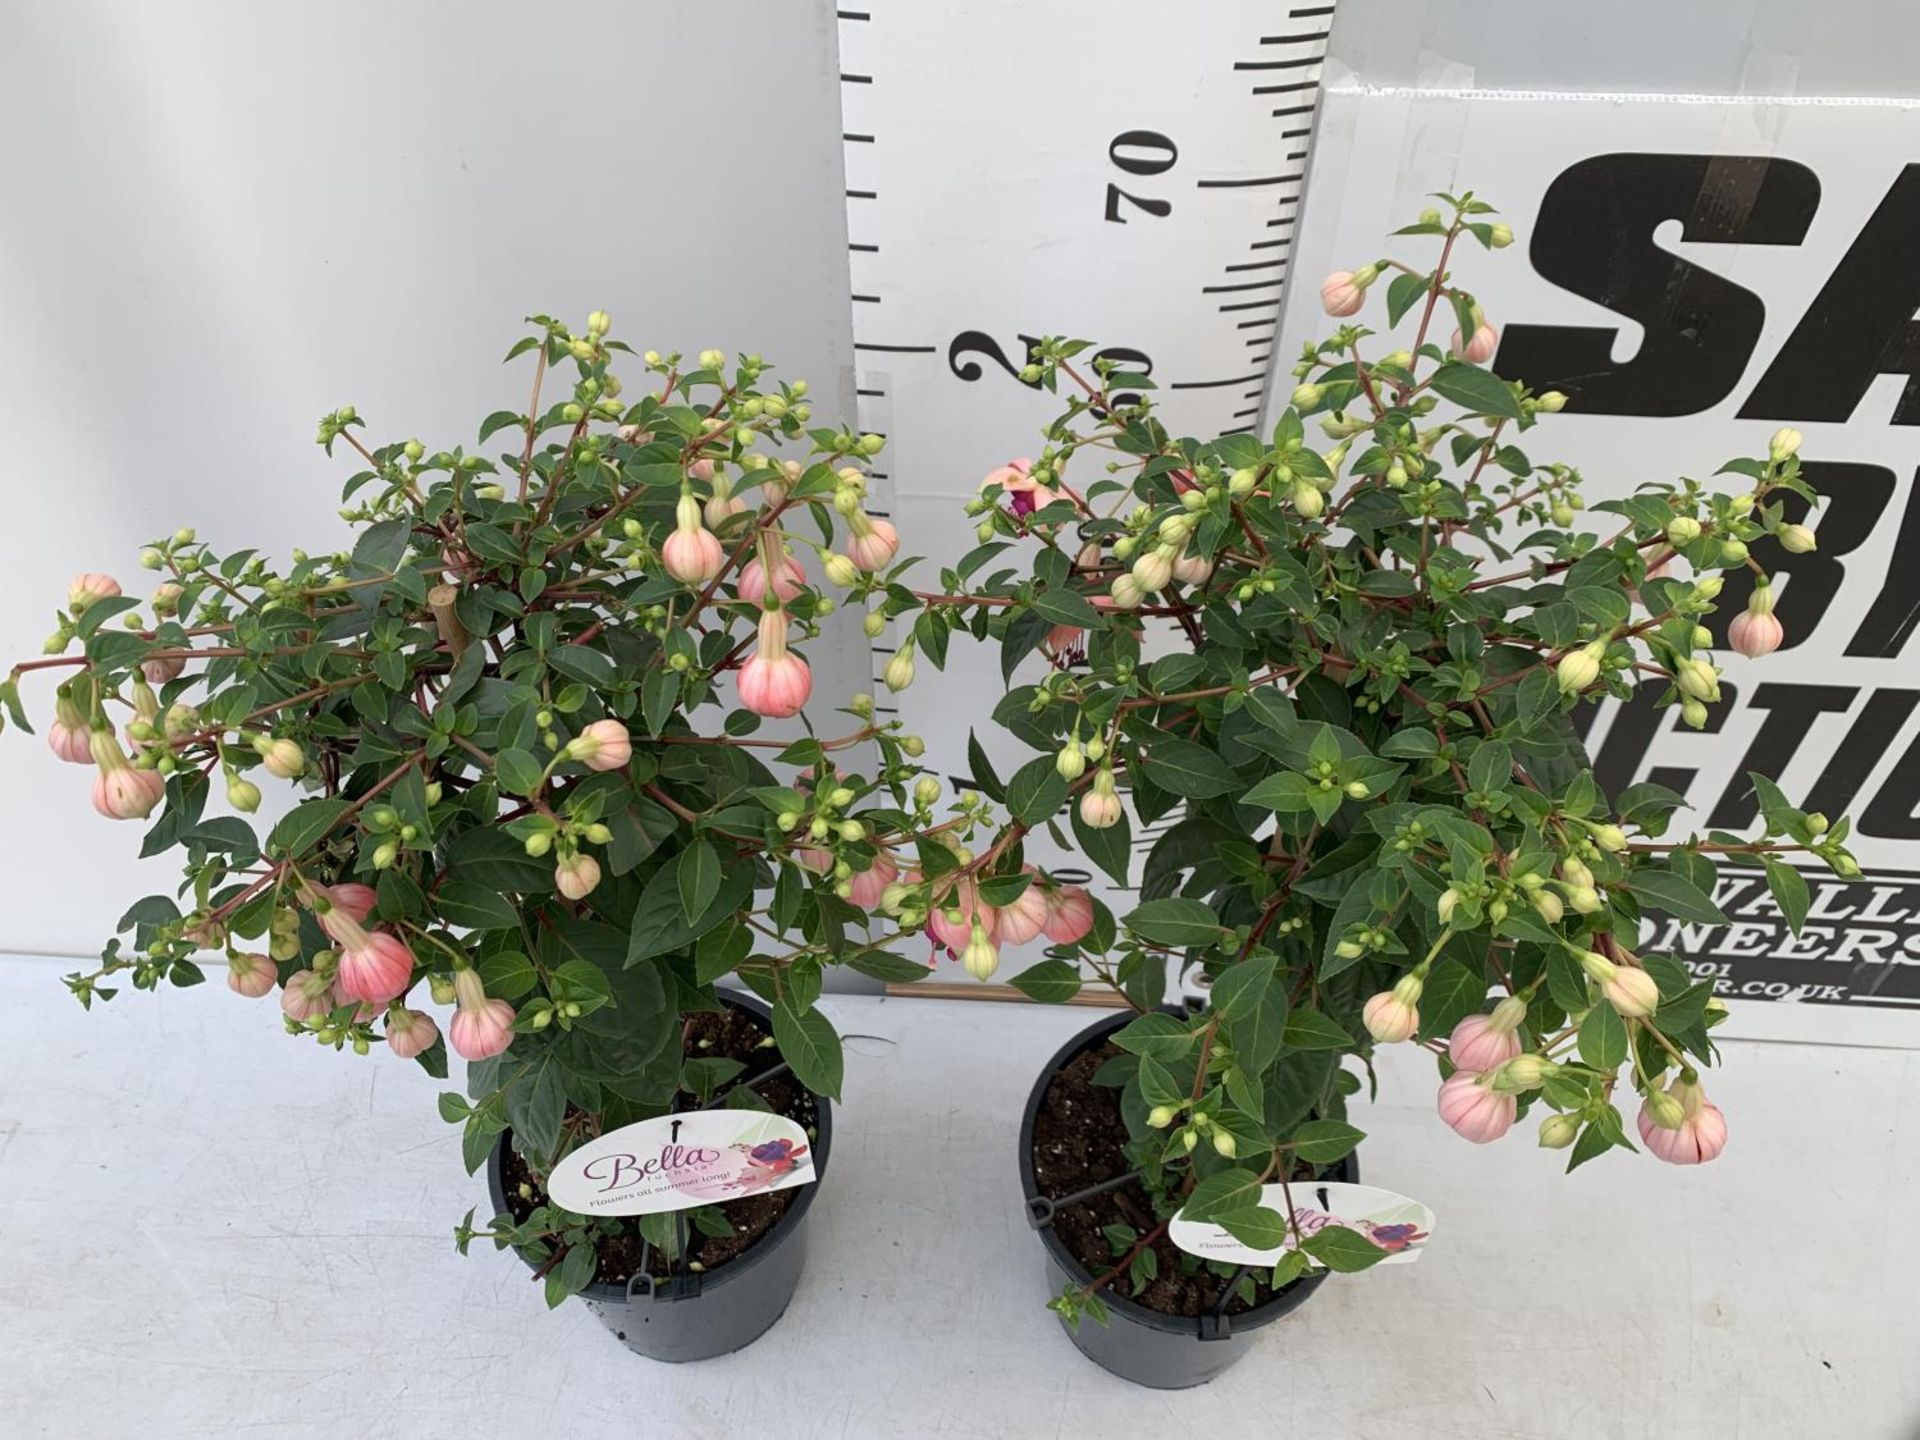 TWO BELLA STANDARD PINK FUCHSIA IN A 3 LTR POTS 70CM -80CM TALL TO BE SOLD FOR THE TWO PLUS VAT - Image 2 of 5